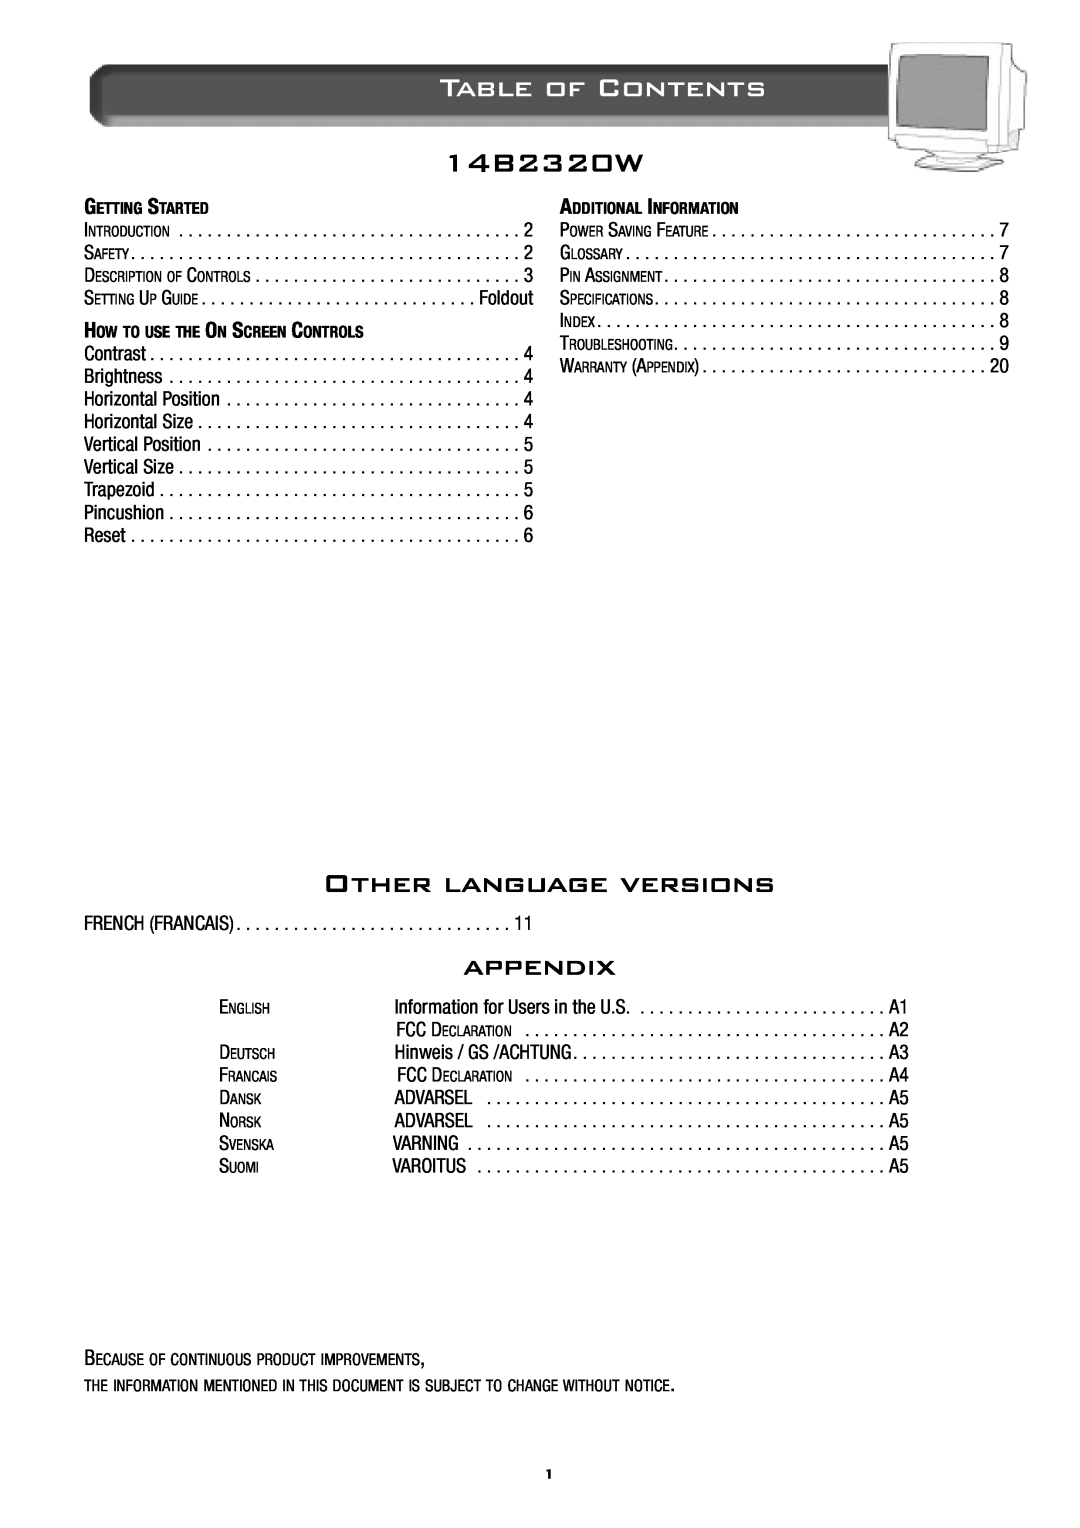 Philips 14B2320W manual Table of Contents, Other language versions, appendix 